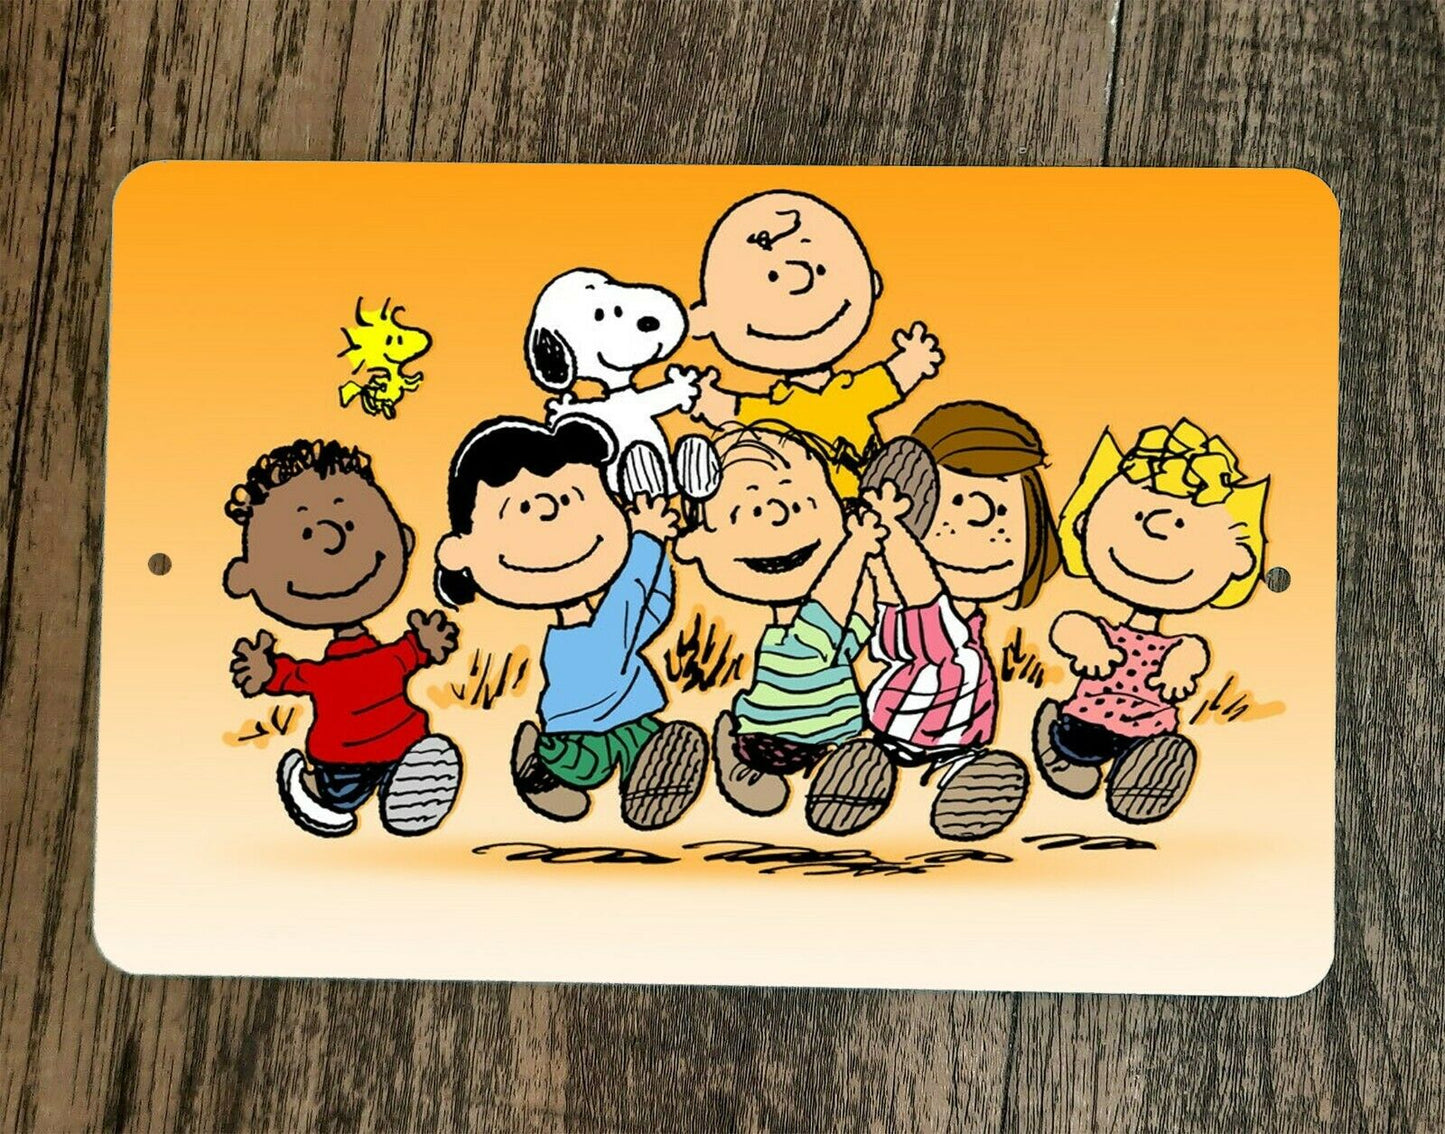 Peanuts Charlie Brown and the Gang 8x12 Metal Wall Sign #2 Classic Cartoon TV Show